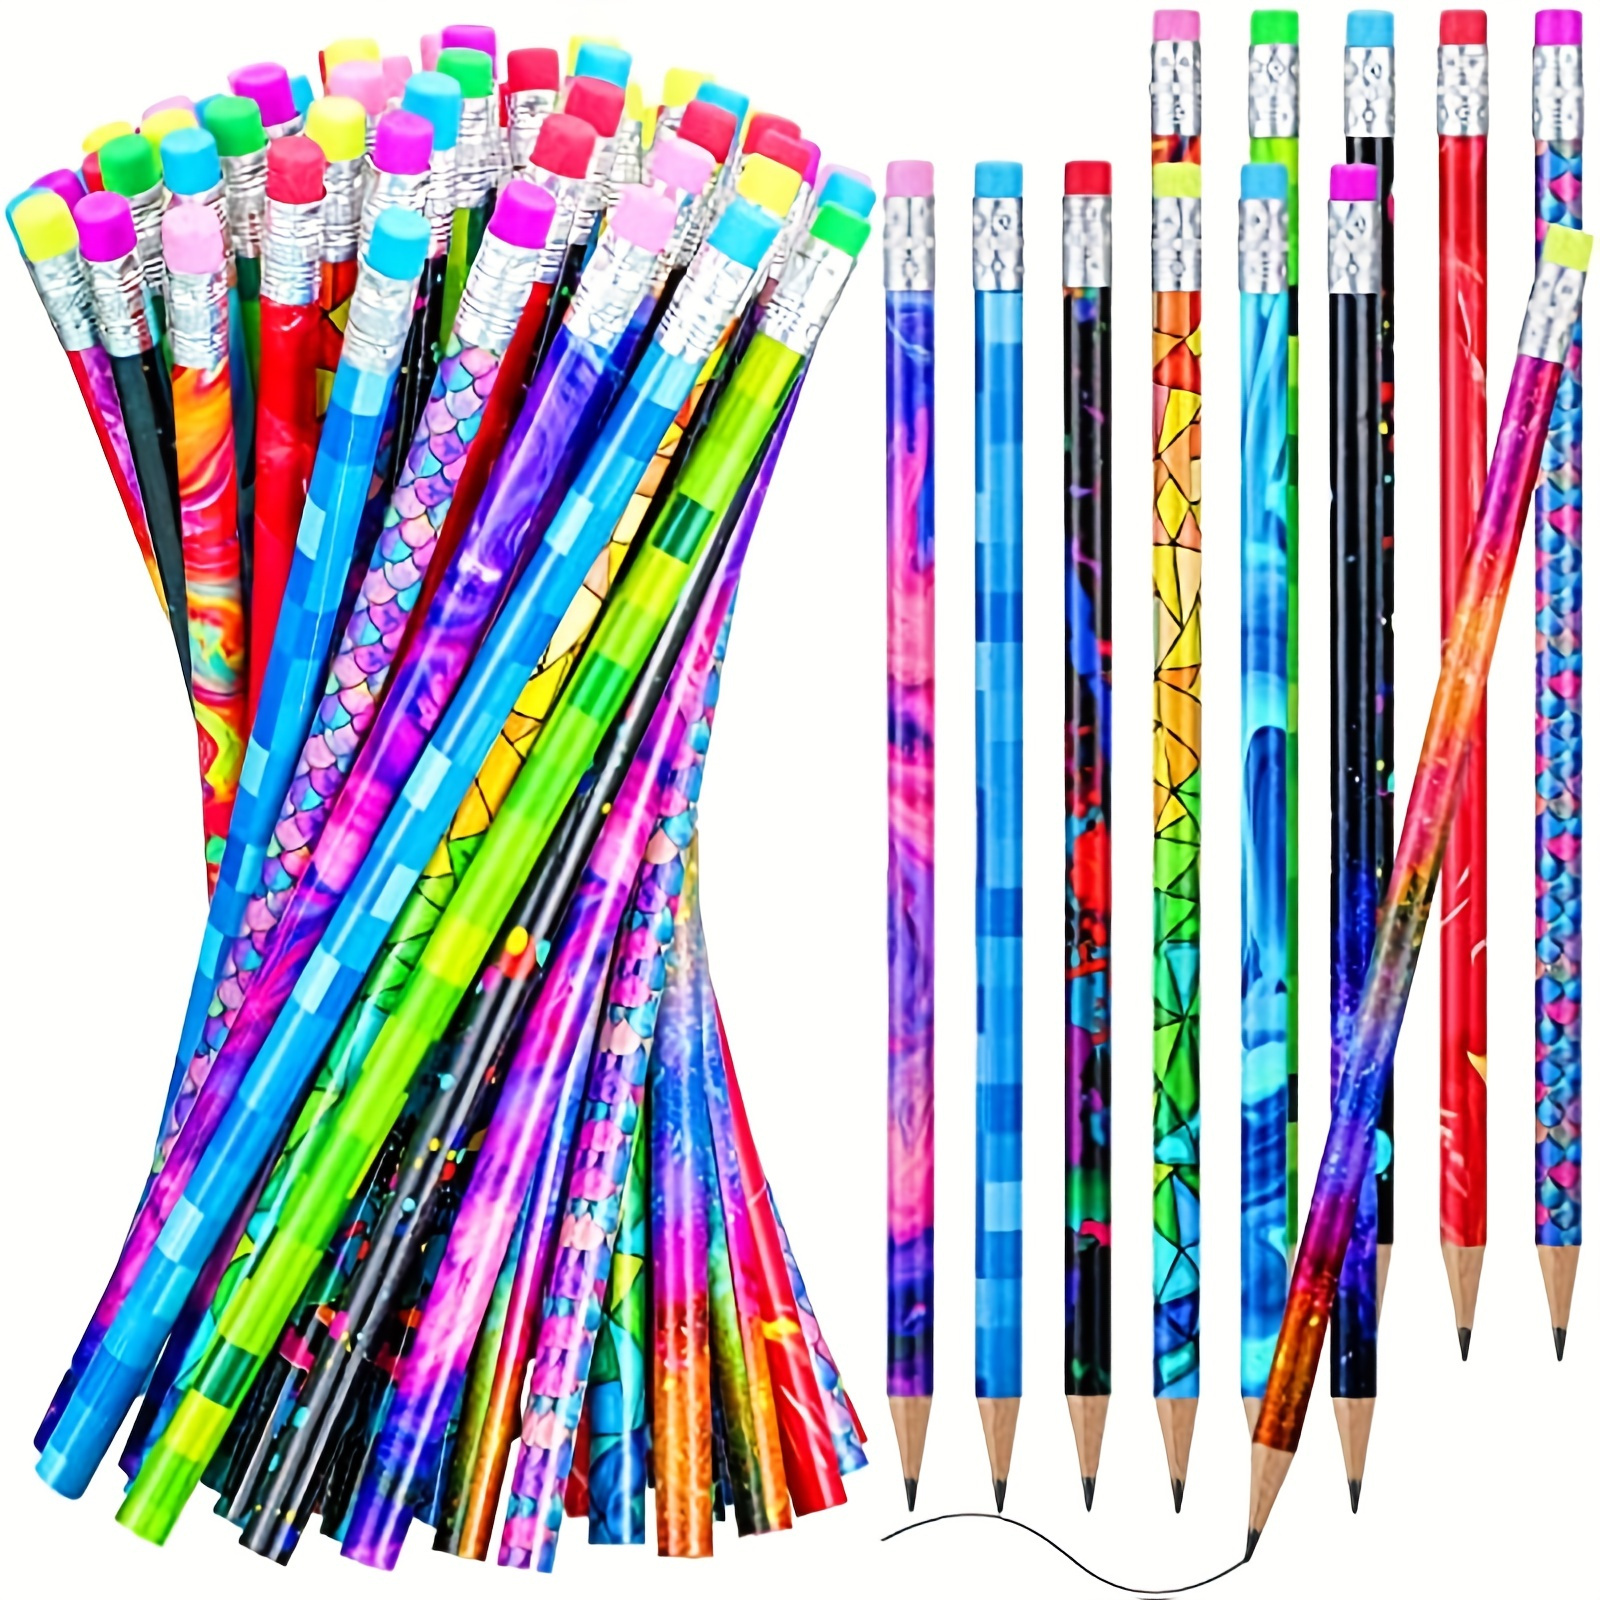 

24pcs Cute Cartoon Hb Pencils With Eraser Tip, Pencils For Writing Drawing Sketching Stationery Prize Gift For Student